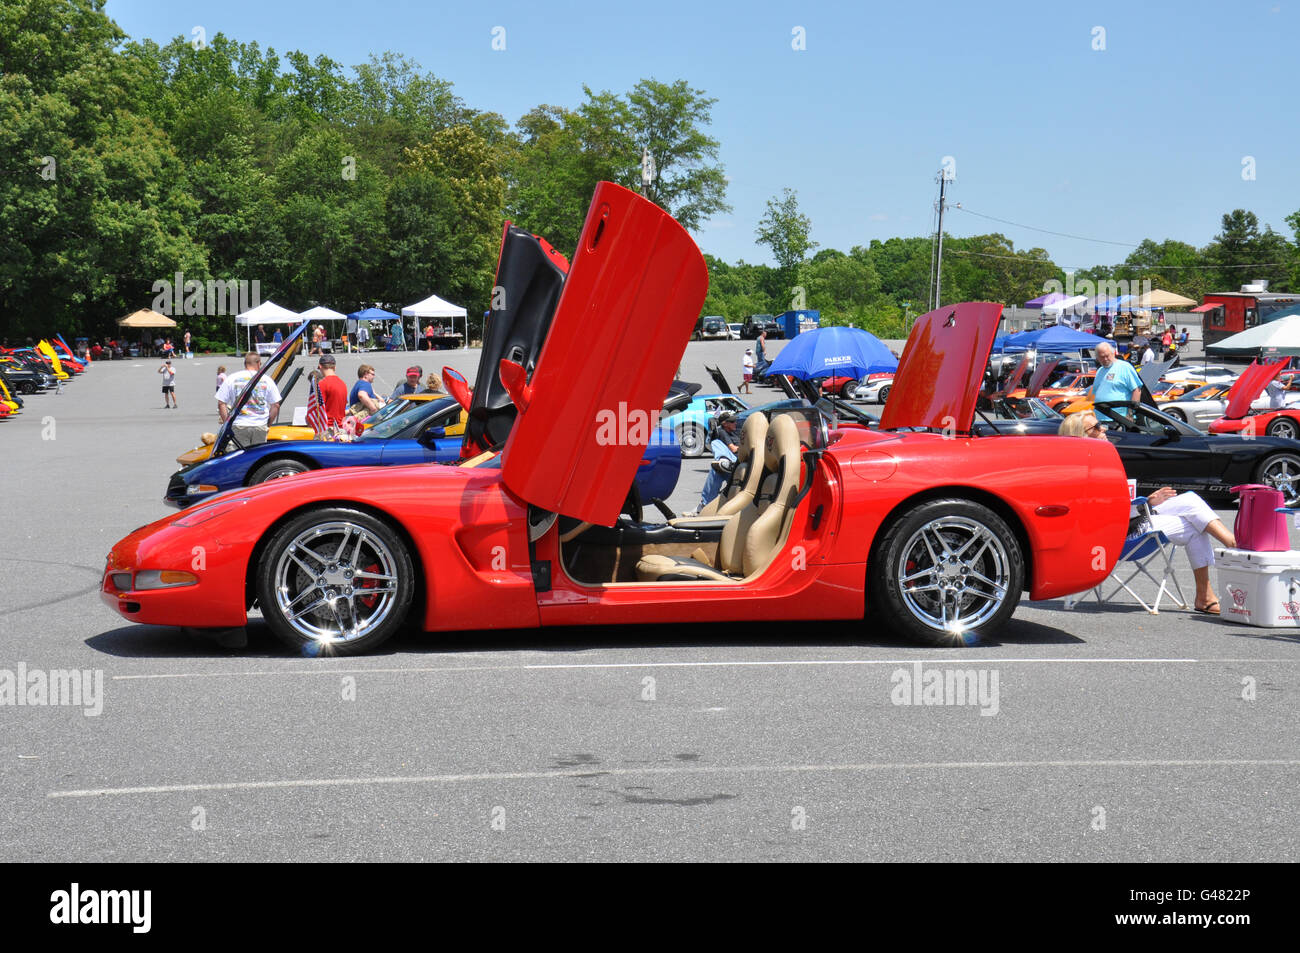 A C5 Corvette with vertical opening doors, at a car show. Stock Photo